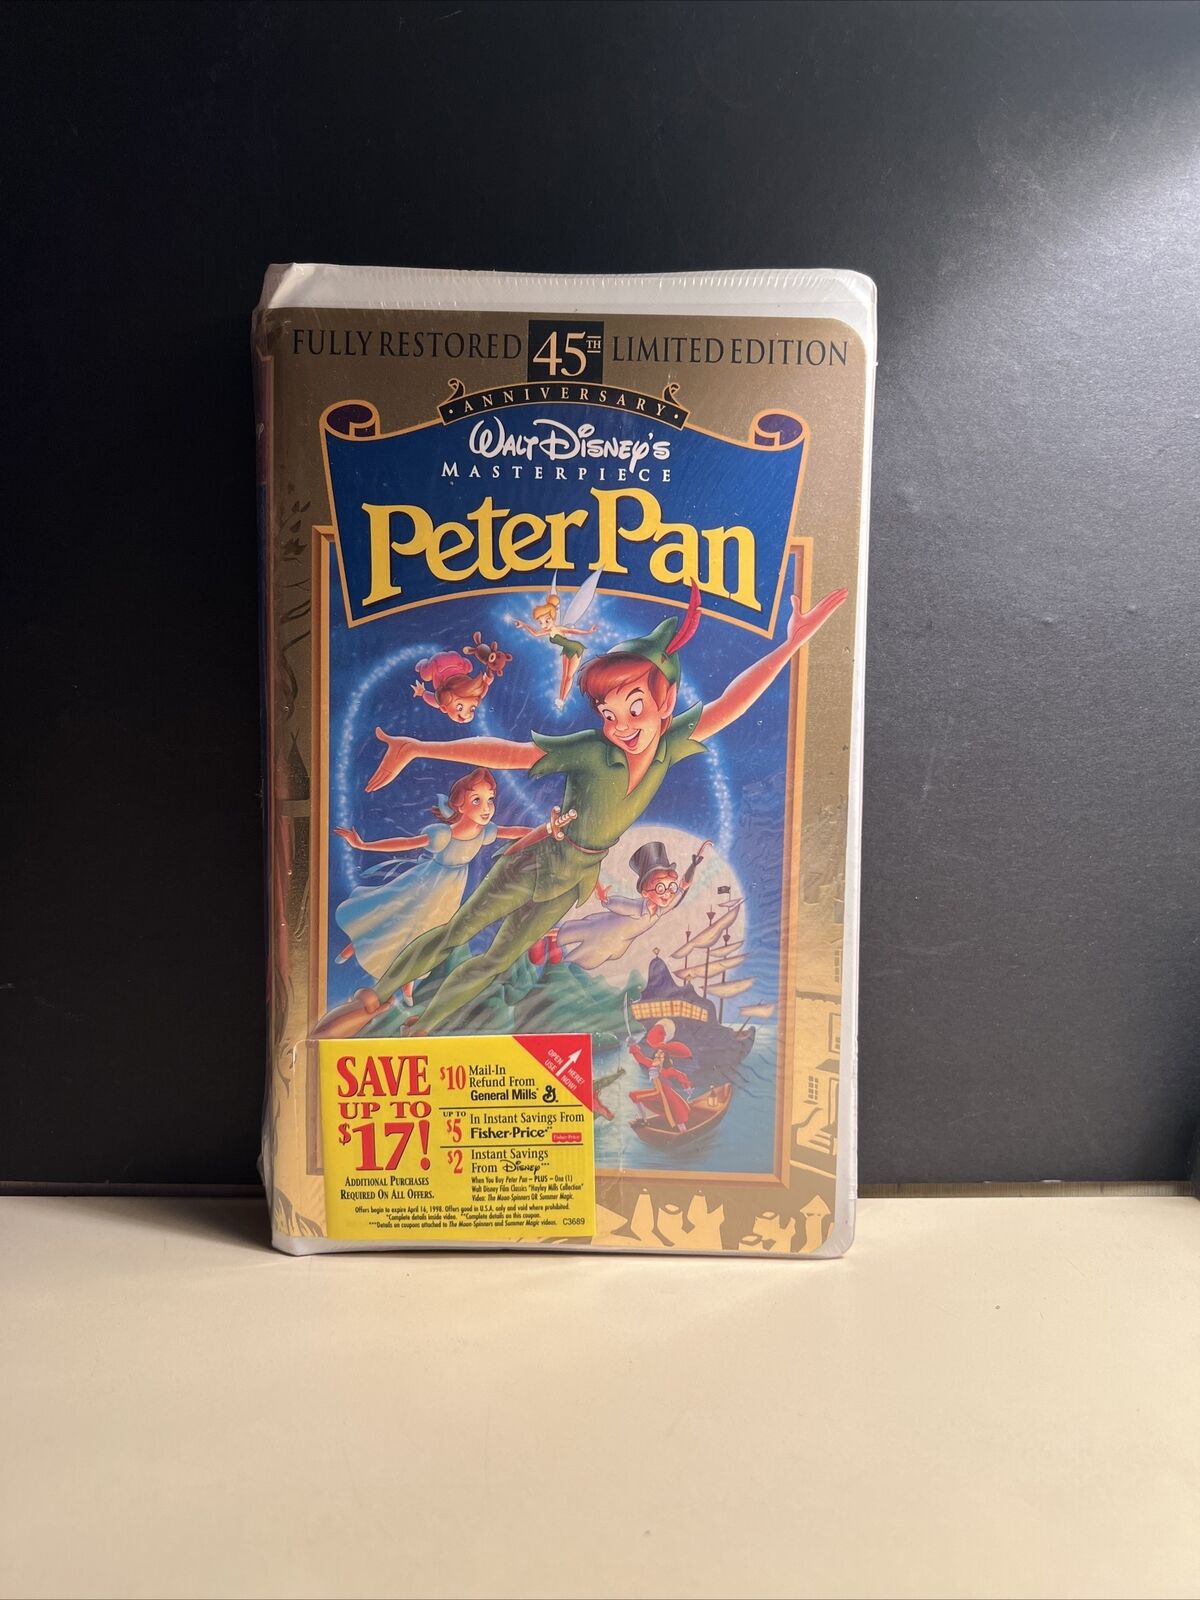 Disney\'s Peter Pan VHS 45th Anniversary Limited Edition Brand New Fully Restored